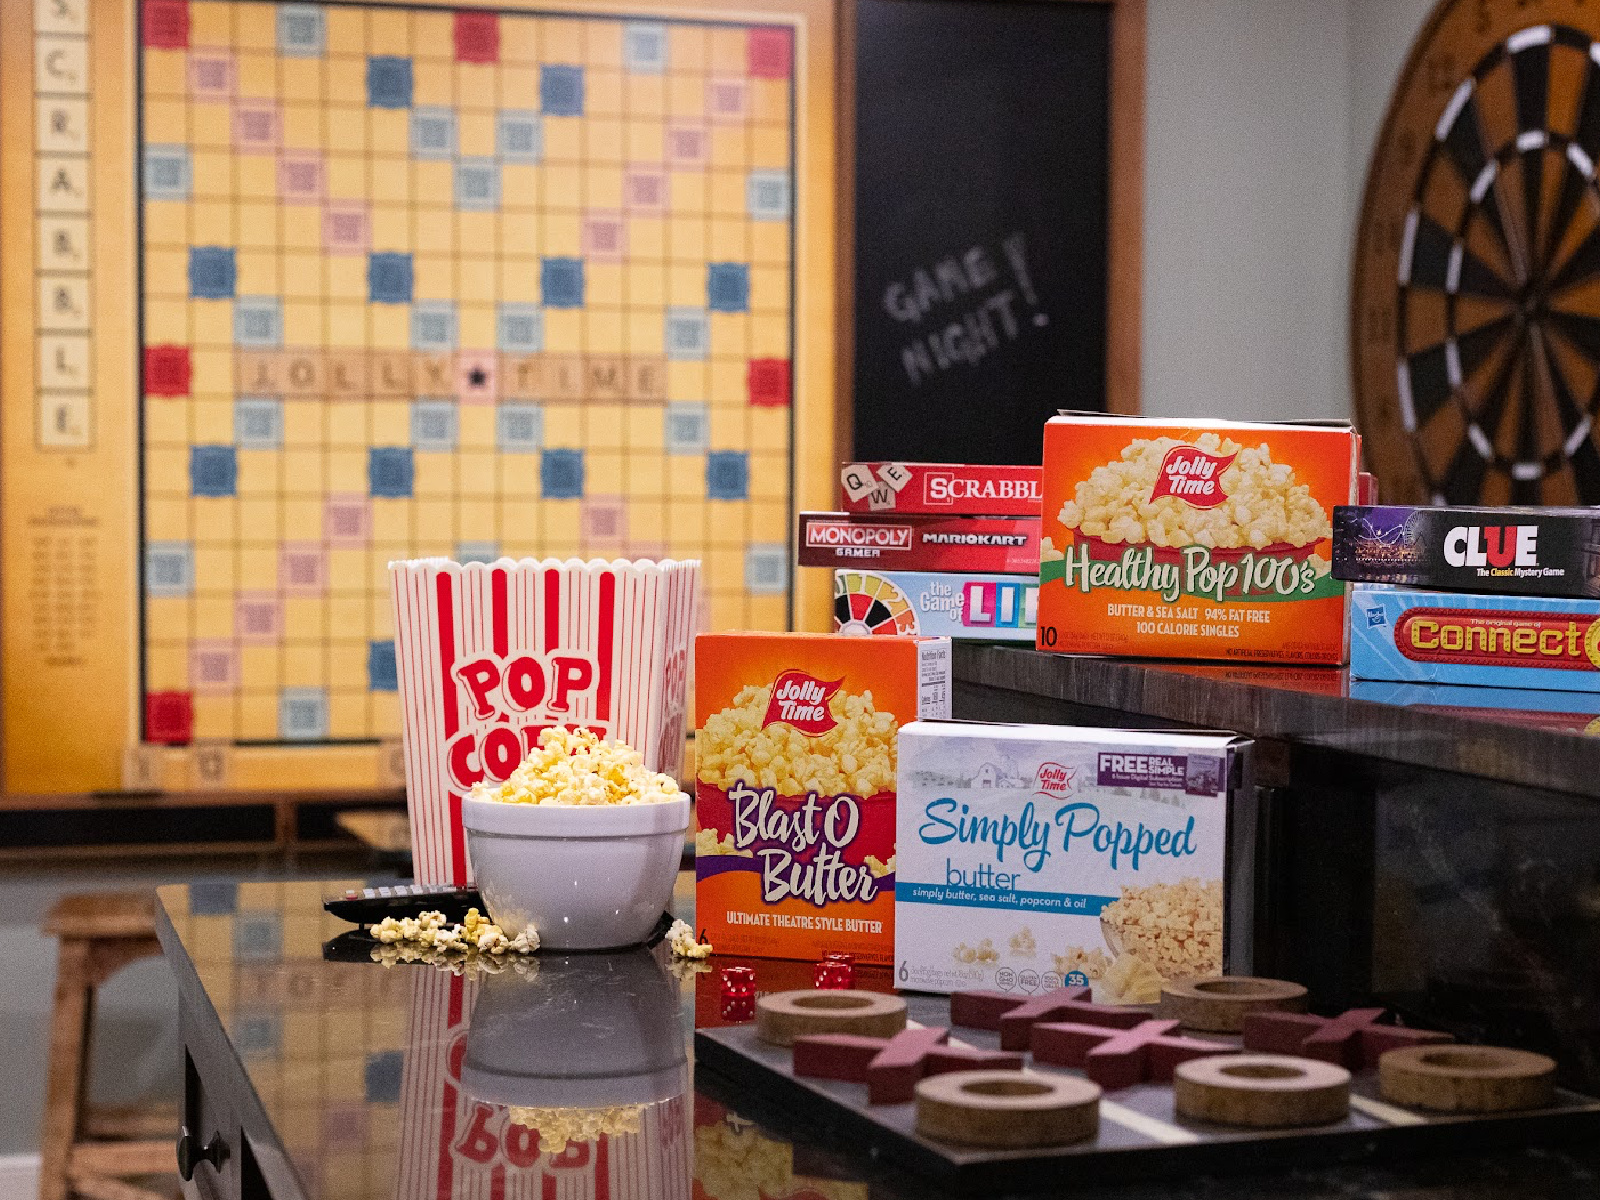 JOLLY TIME Pop Corn is BOGO At Publix – Stock Up For Summer Fun AND Don’t Forget To Enter My Giveaway!